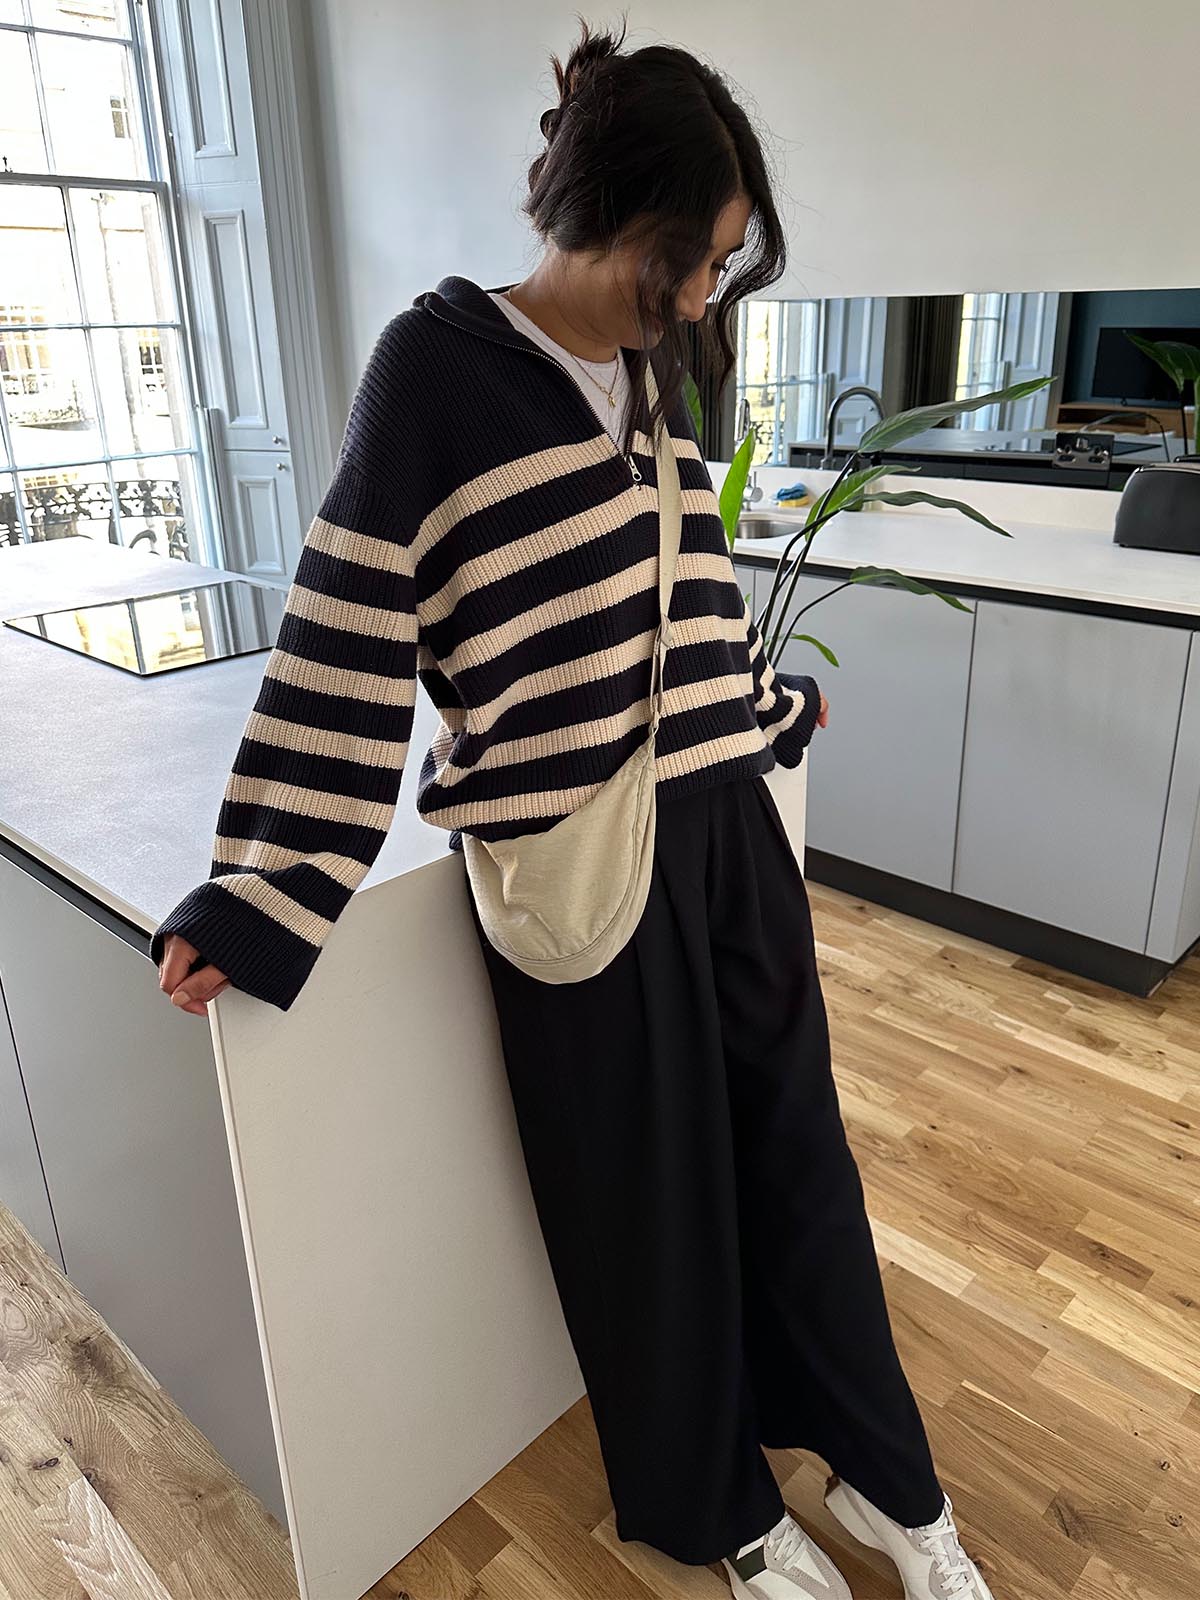 Model wearing the Lana sustainable trousers in black with a striped black and white jumper and a white cross body bag. They are in a well lit room, leaning against a countertop with their face mostly hidden by their hair as they look towards the ground. 